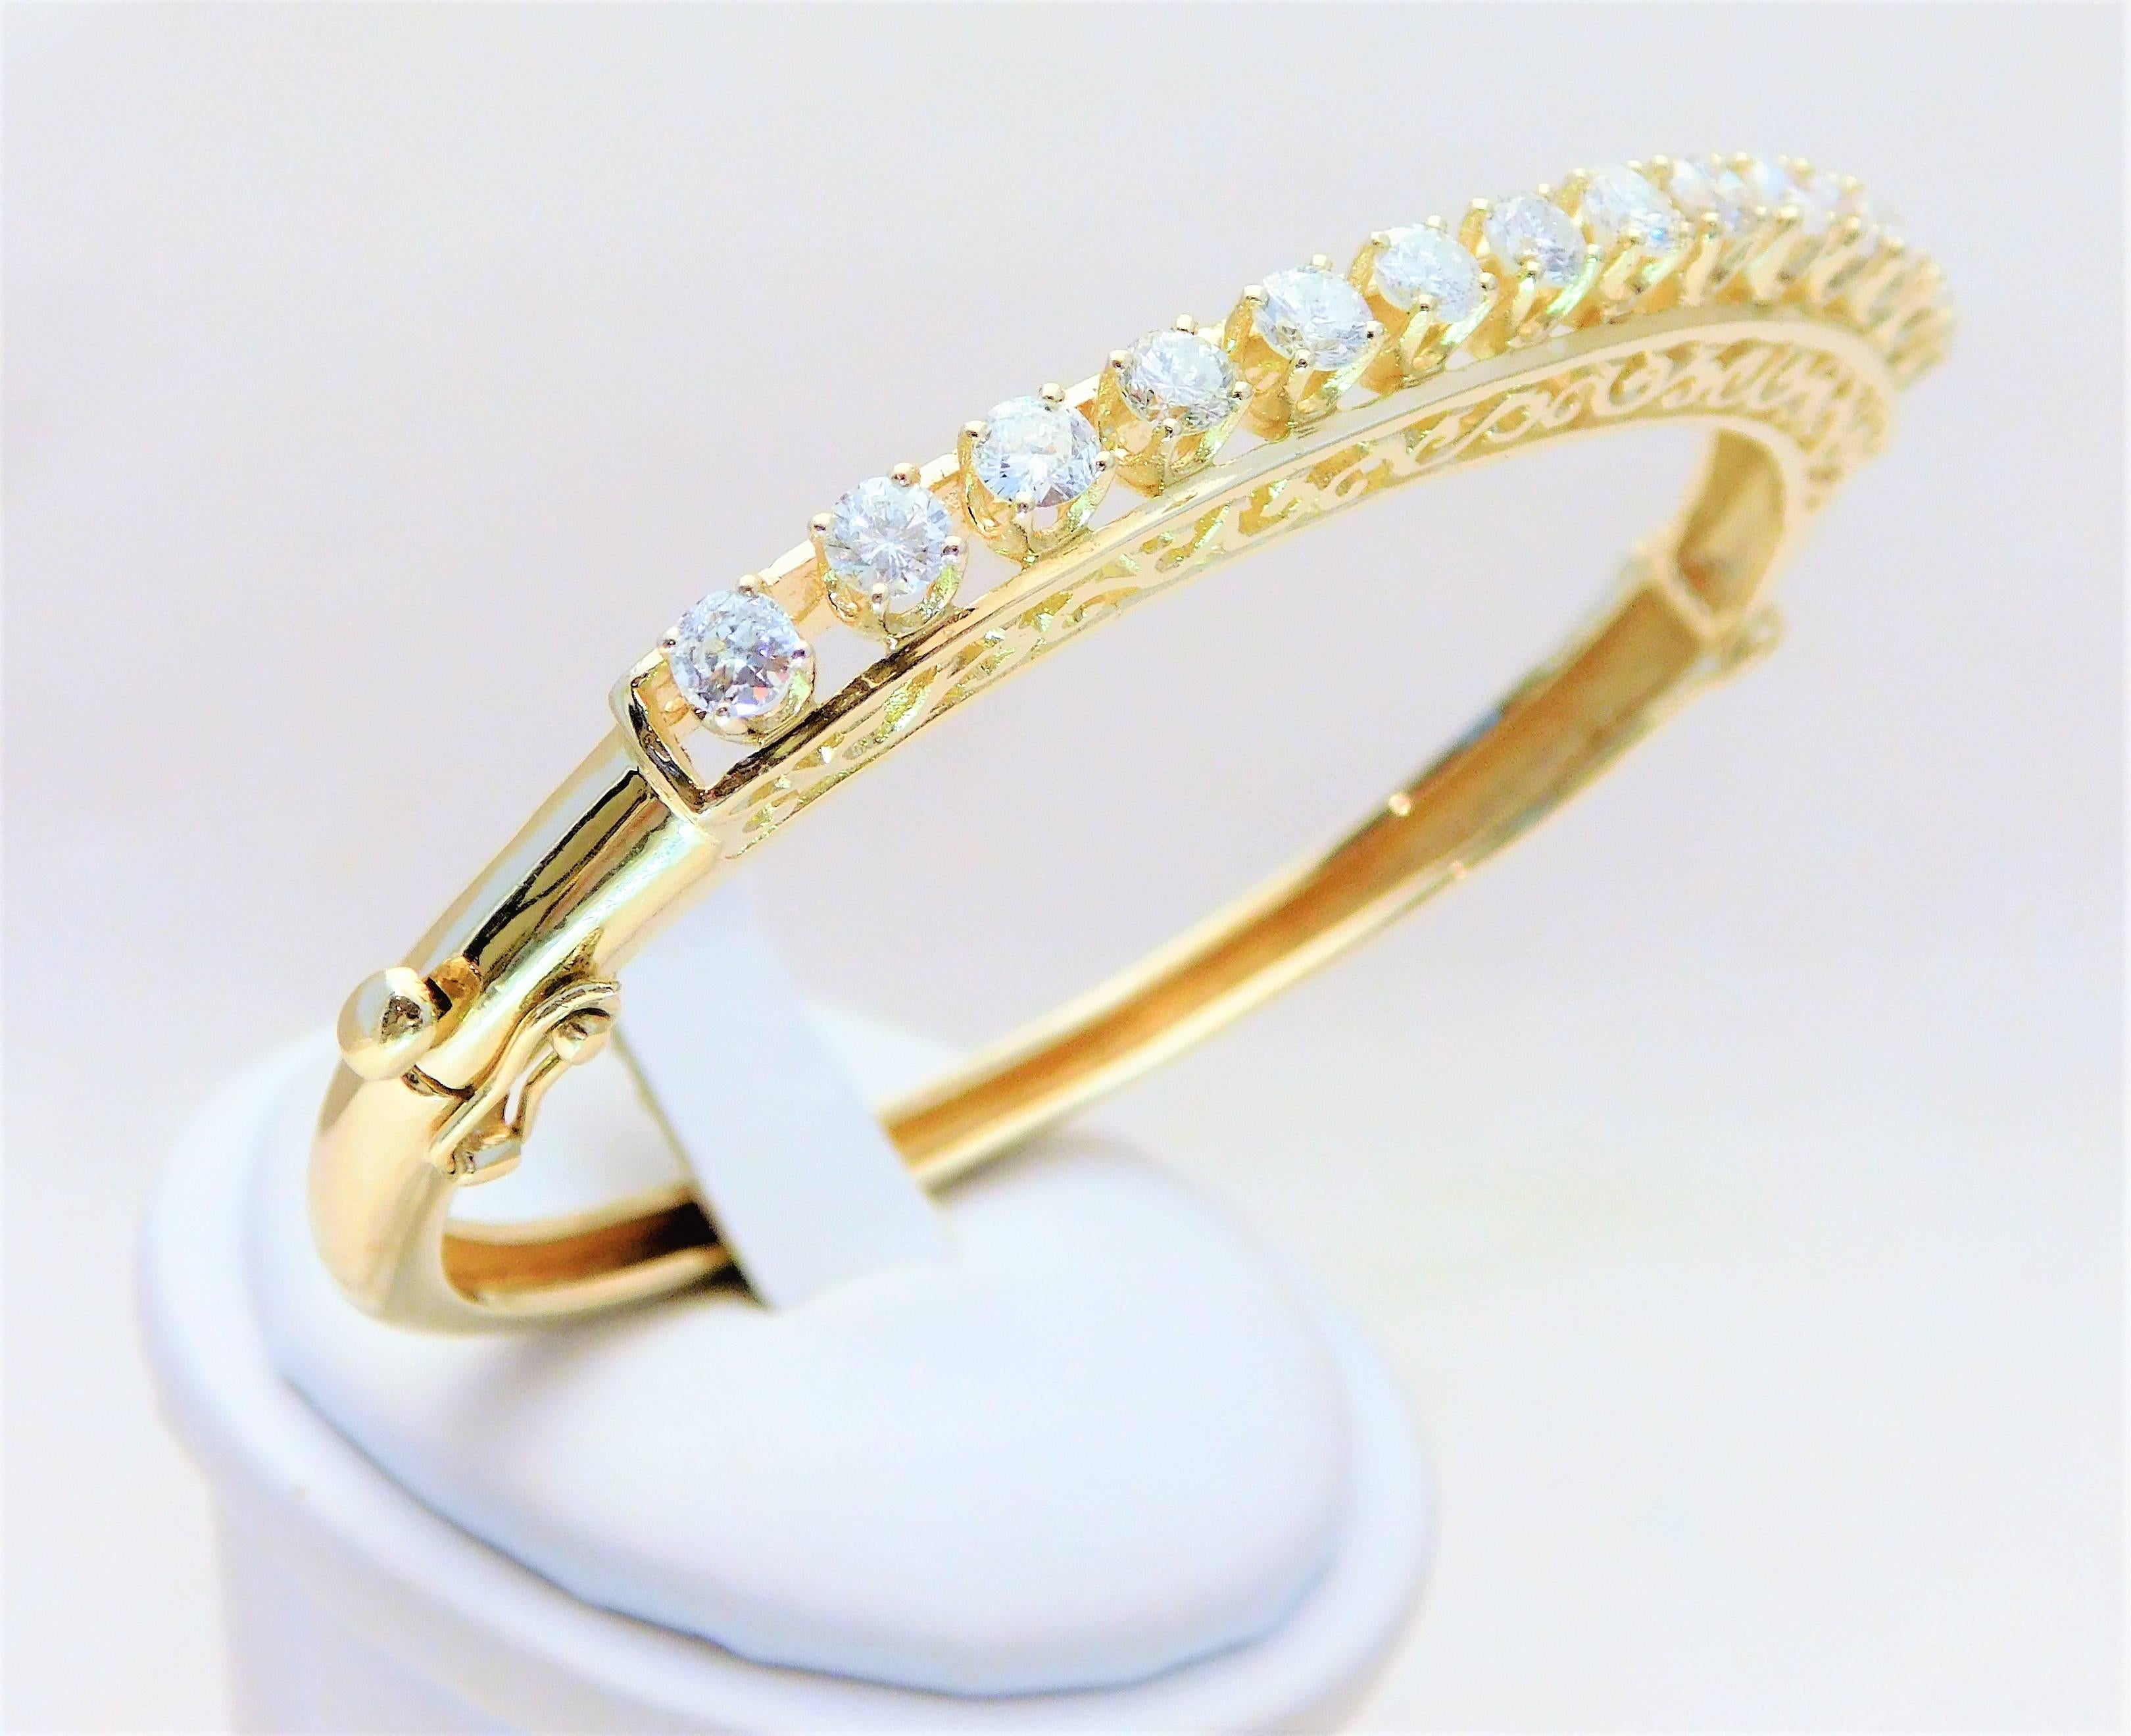 The bangle bracelet is one of the oldest forms of jewelry known to man-kind.  Even today, it represents a staple in any lady’s wardrobe.  From an uptown New Orleans Estate.  This breathtaking bangle bracelet has been crafted in solid 14k yellow gold